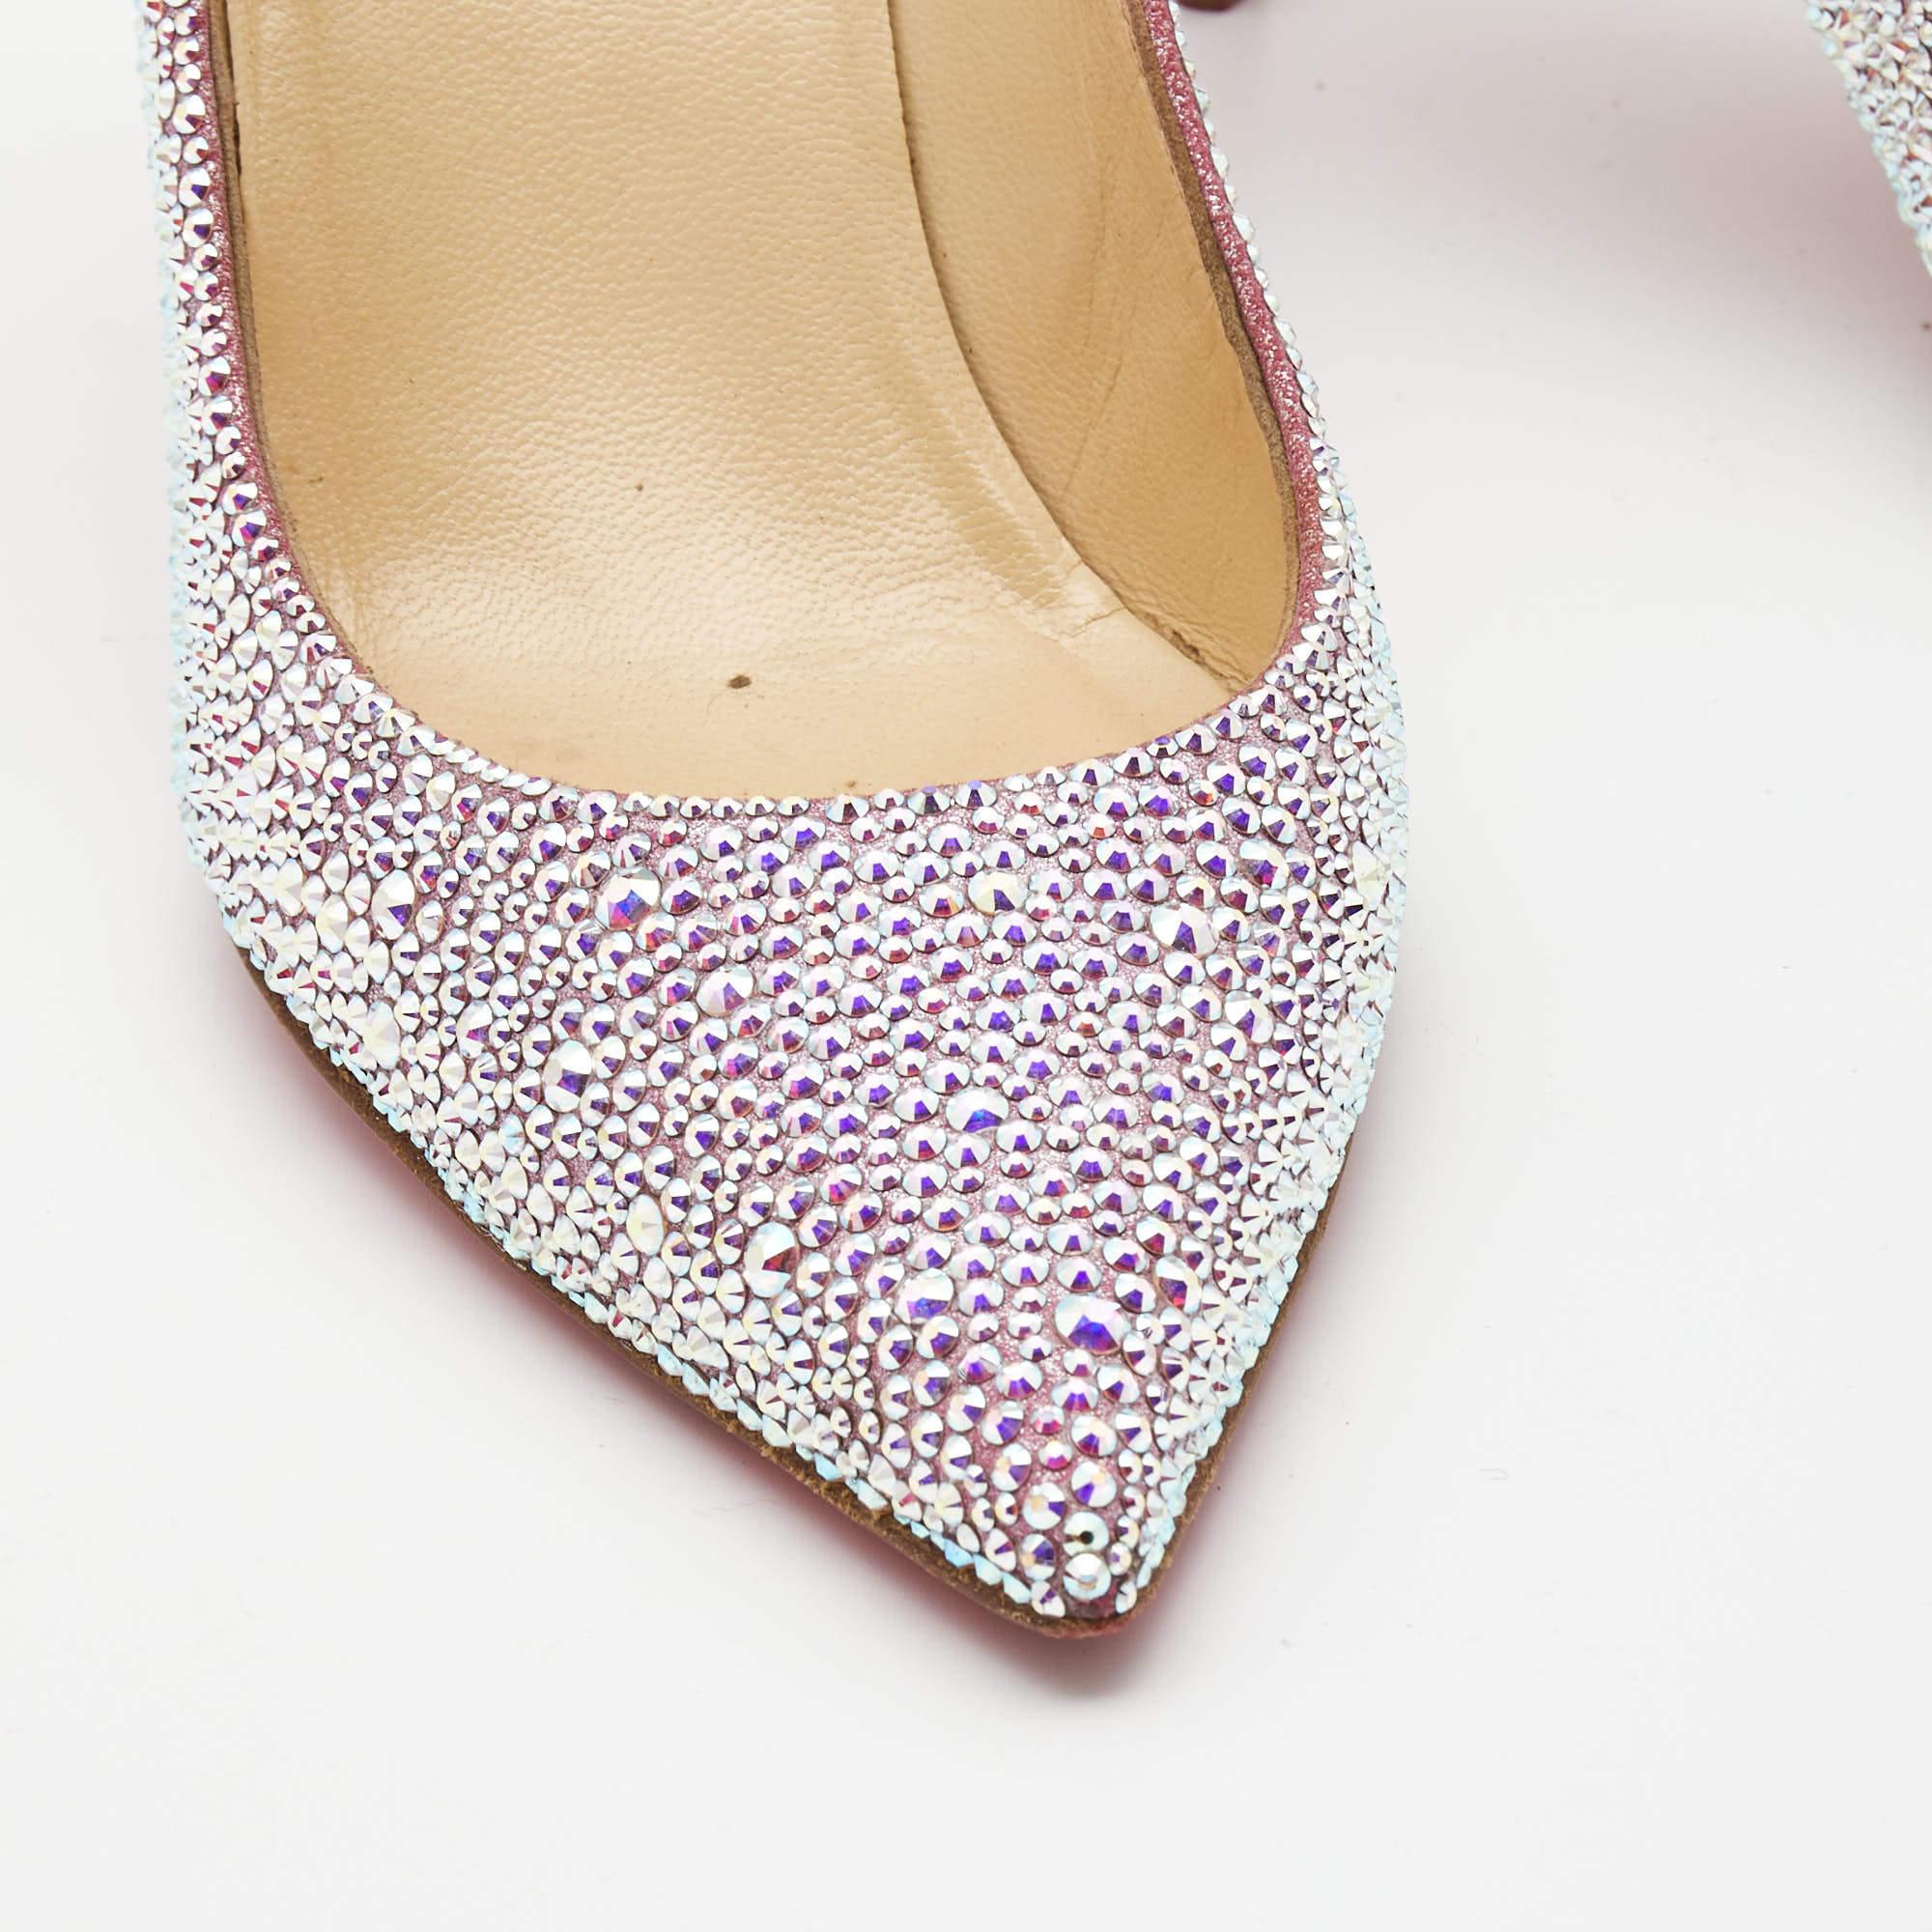 Christian Louboutin Metallic Two Tone Leather Kate Strass Pumps Size 38 For Sale 1